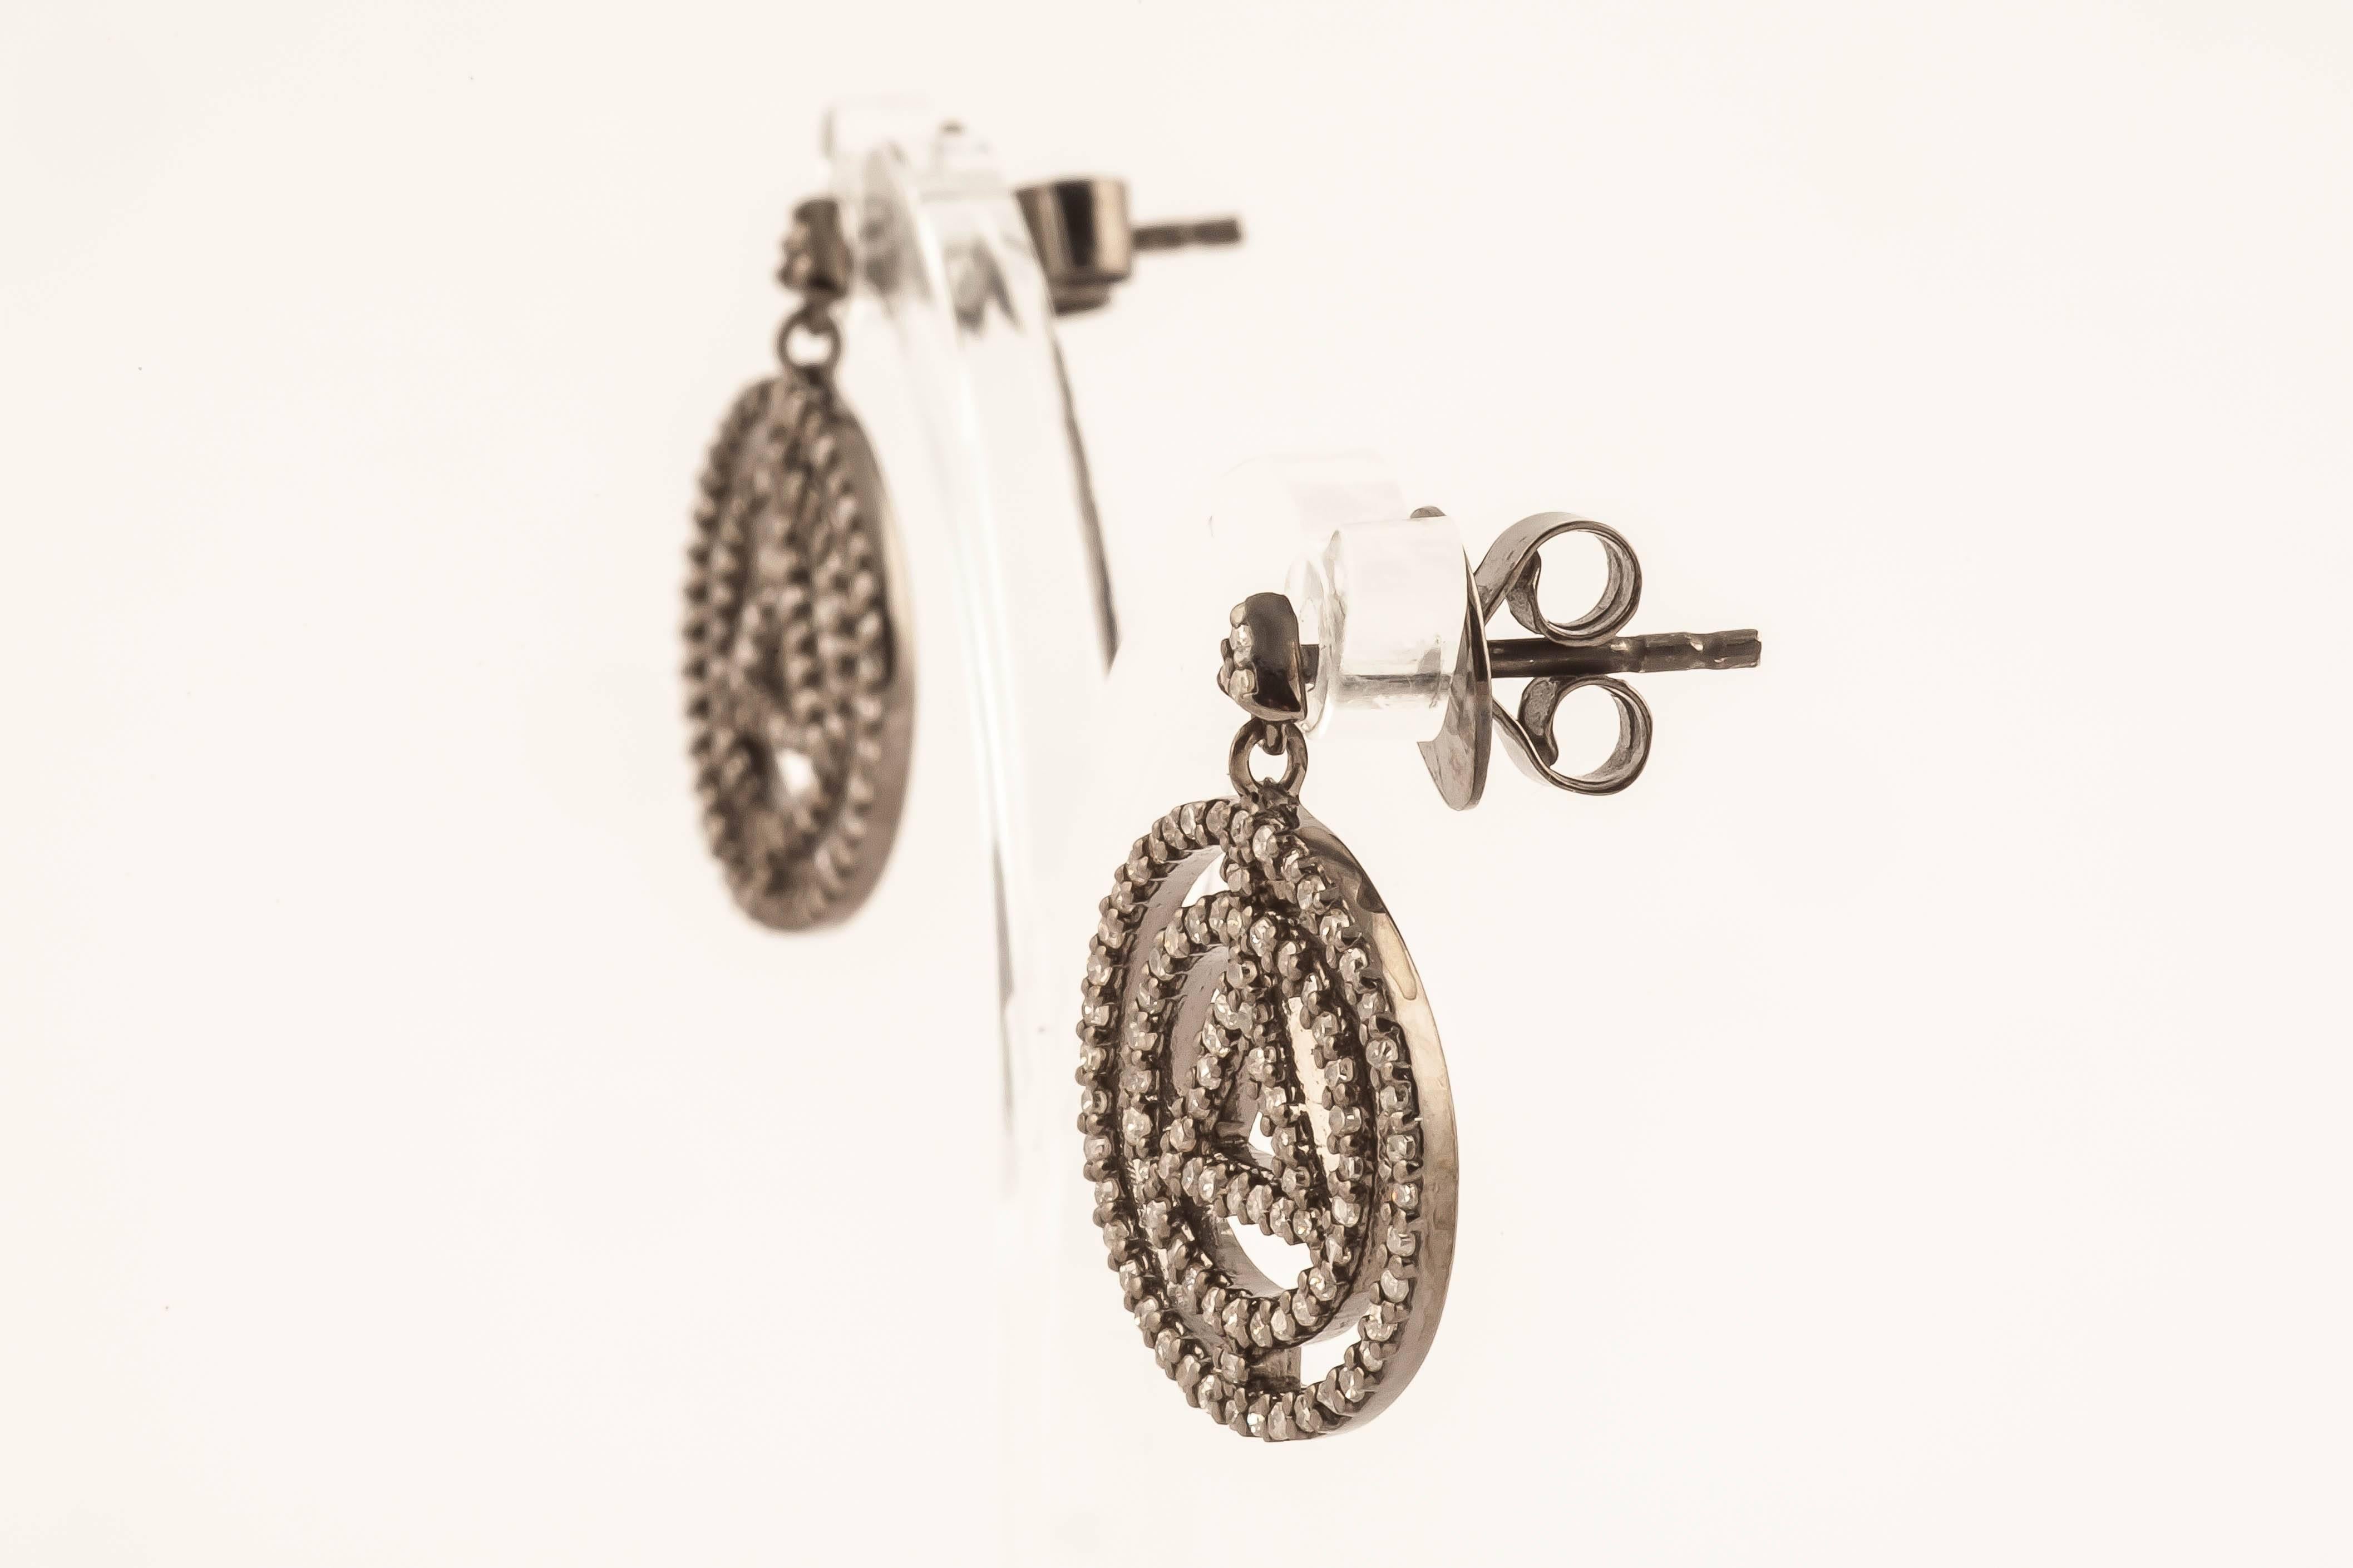 Insignia pyramid earrings.
Black rhodium plated sterling silver and white diamonds.
Handmade in Jaipur, India.